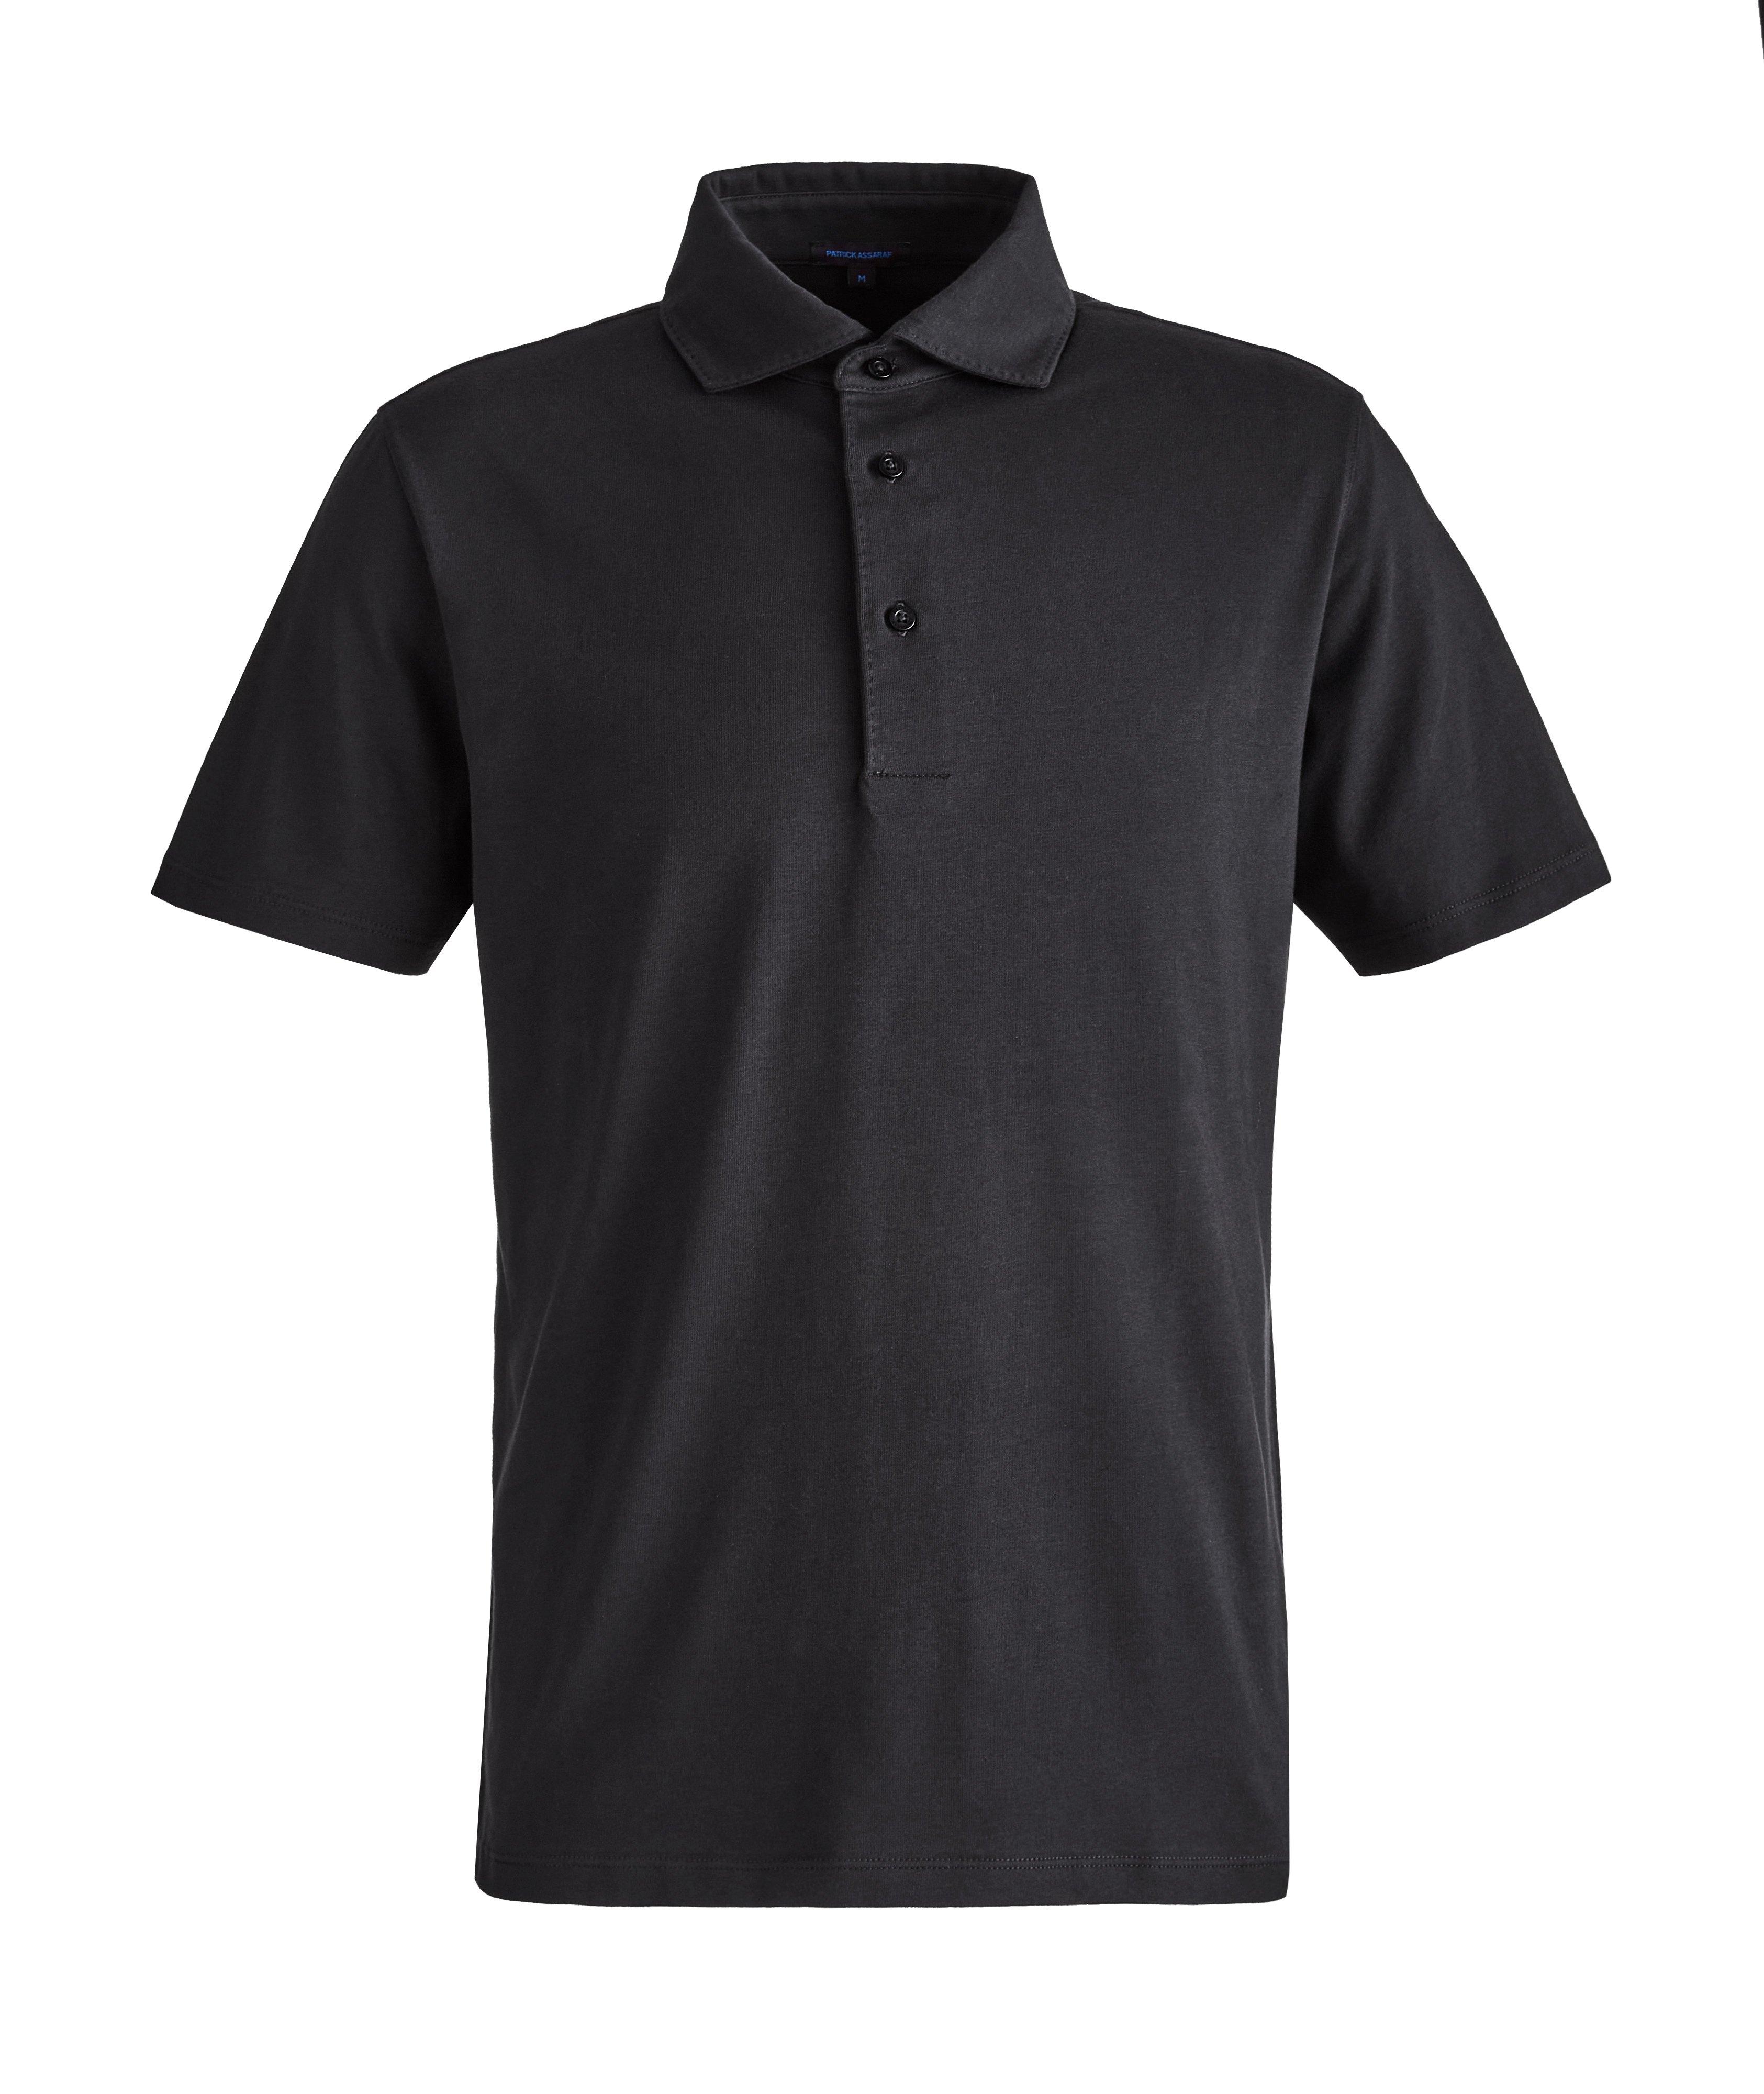 Printed Stretch-Cotton Jersey Polo image 0